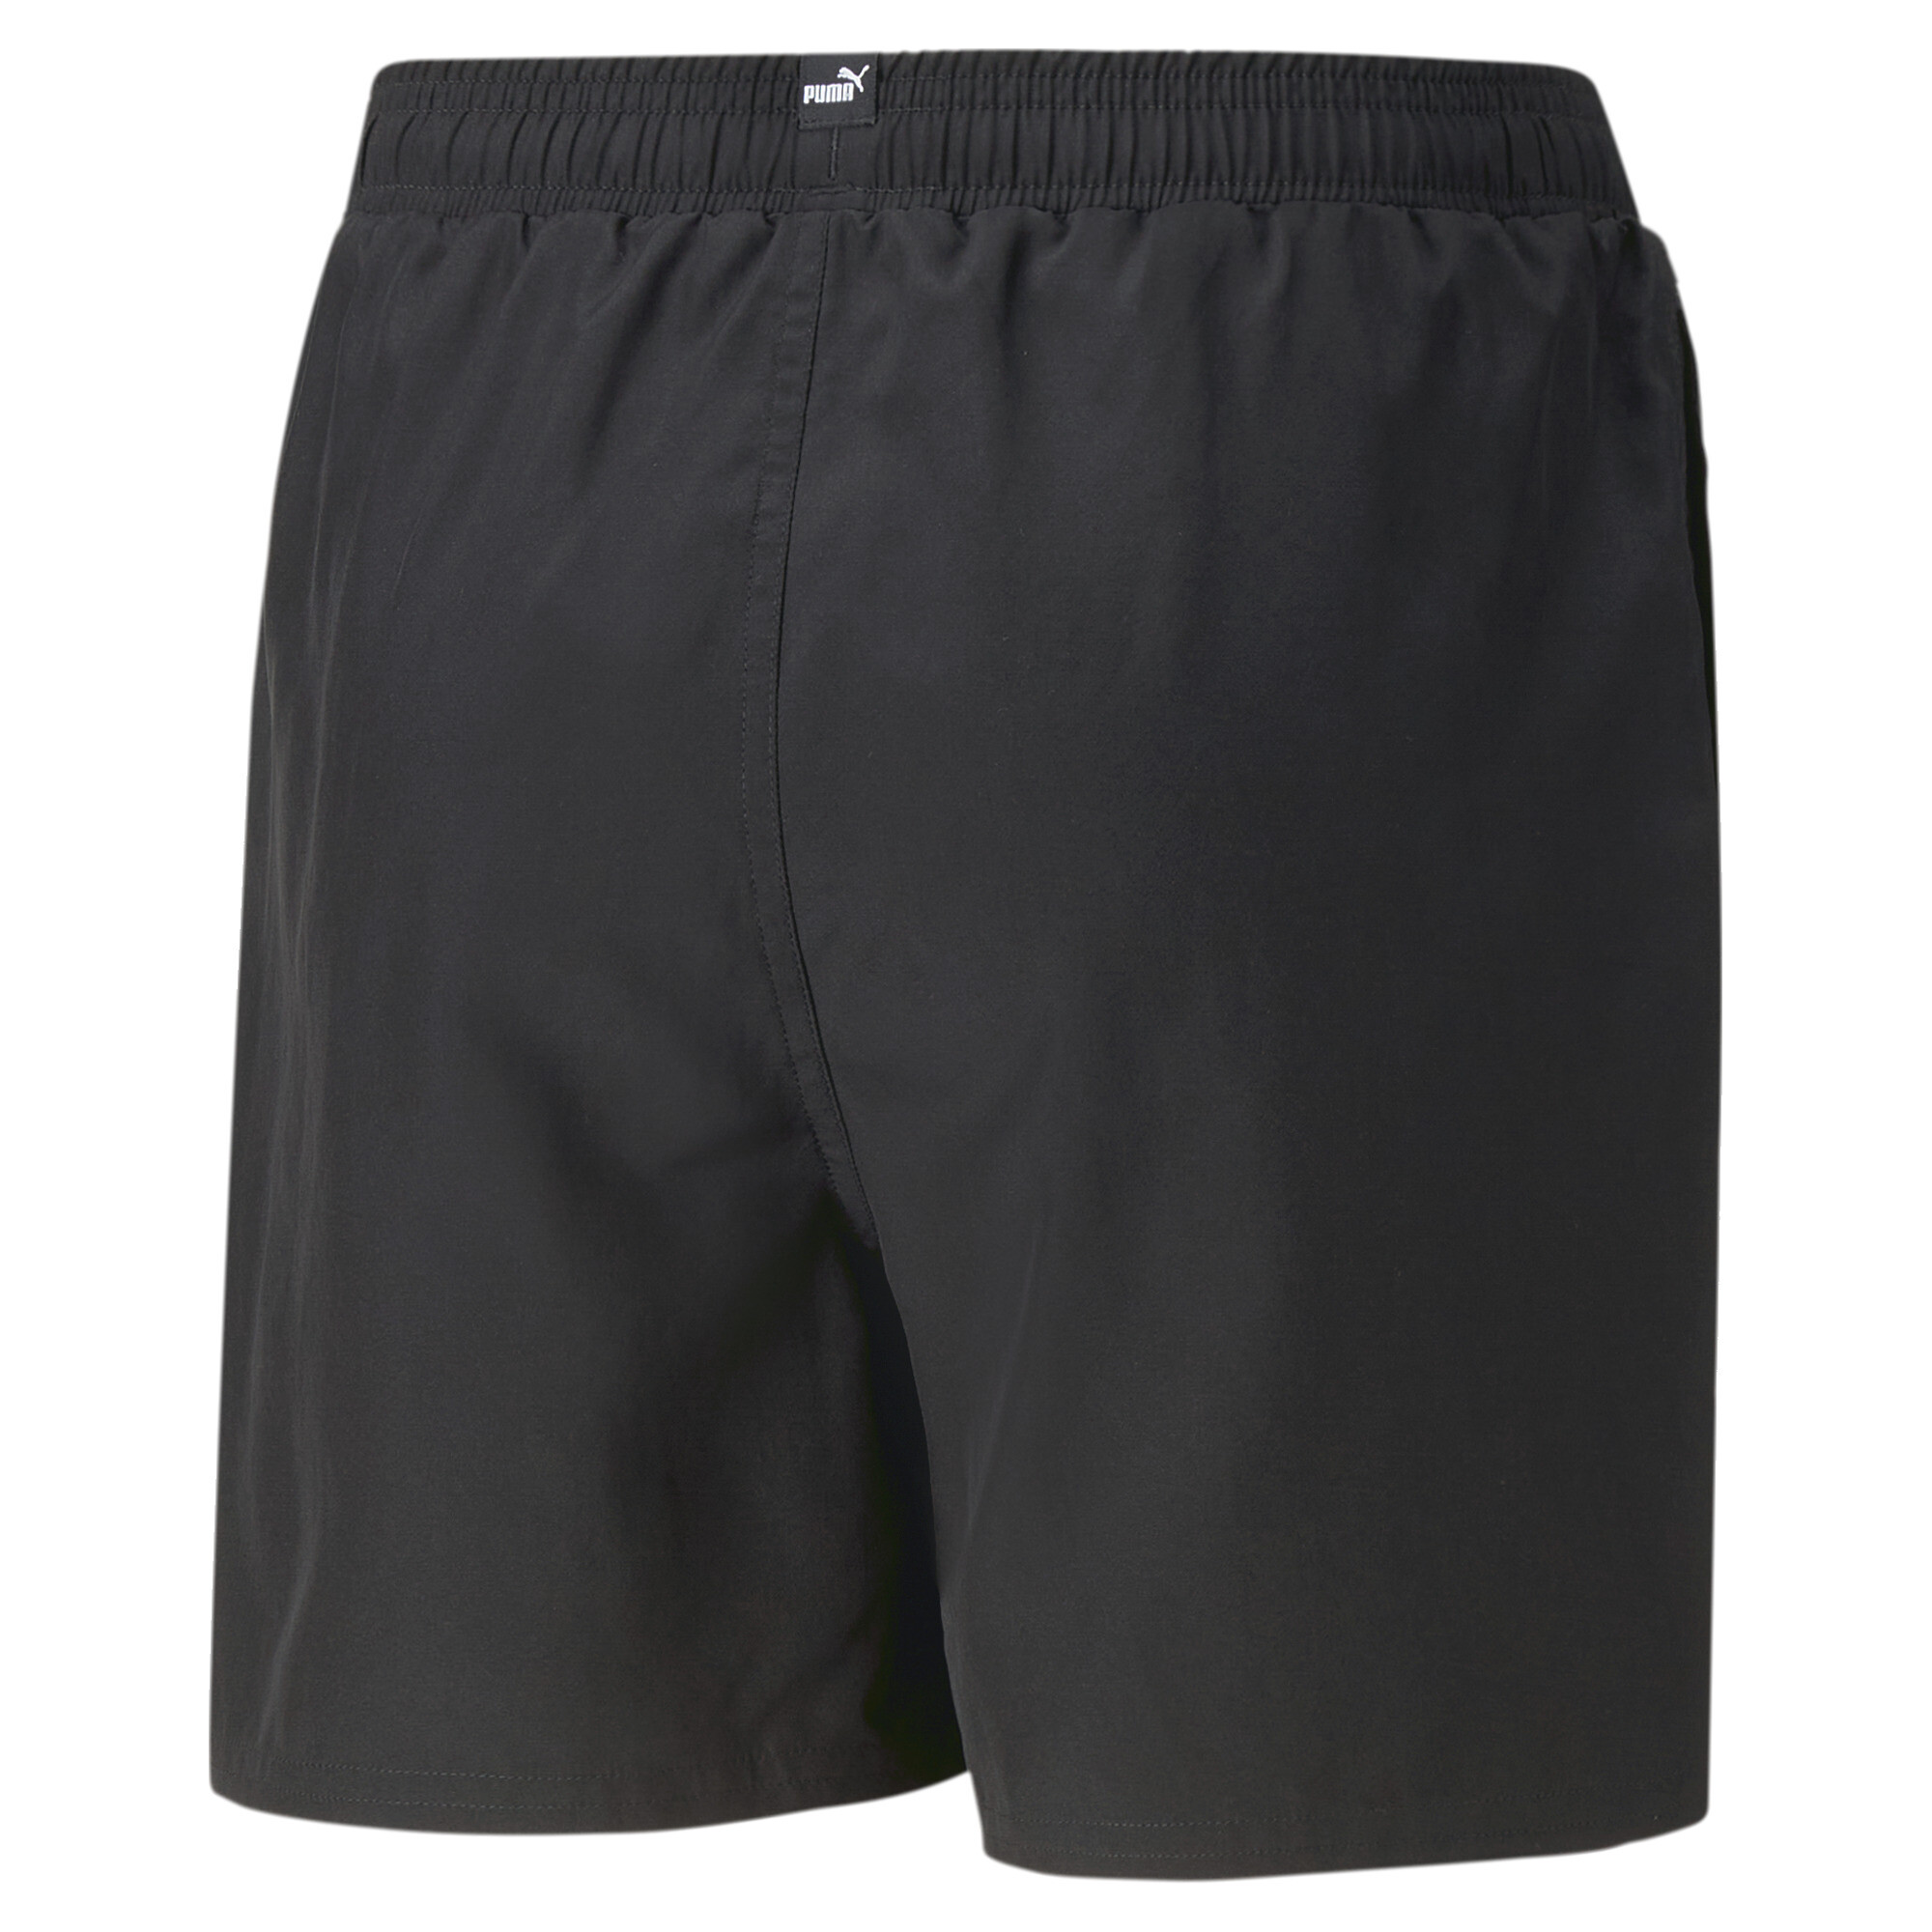 PUMA Essentials+ Logolab Woven Shorts In Black, Size 9-10 Youth